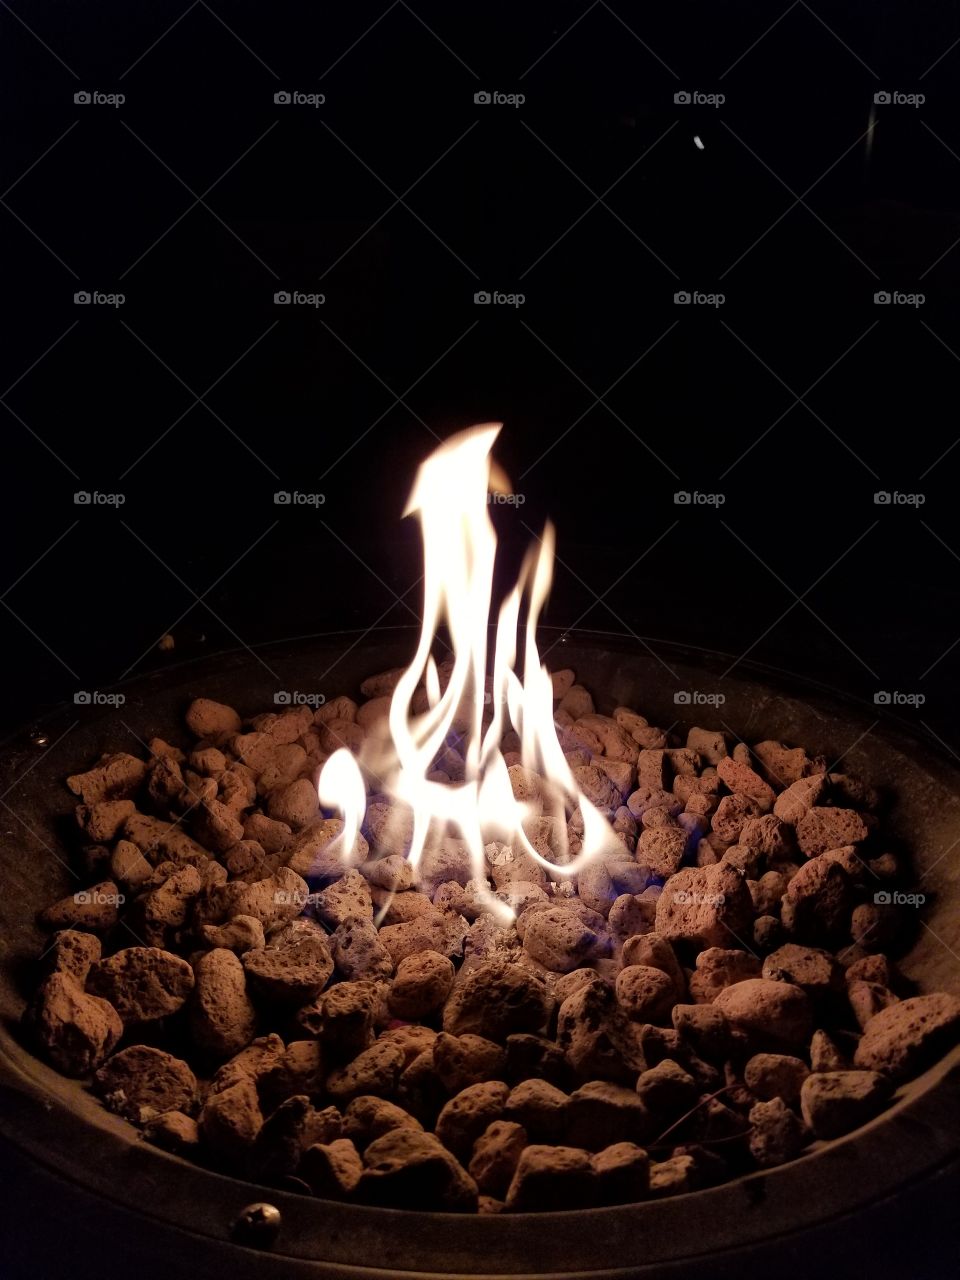 Burning fire over coals in a fire pit in the darkness